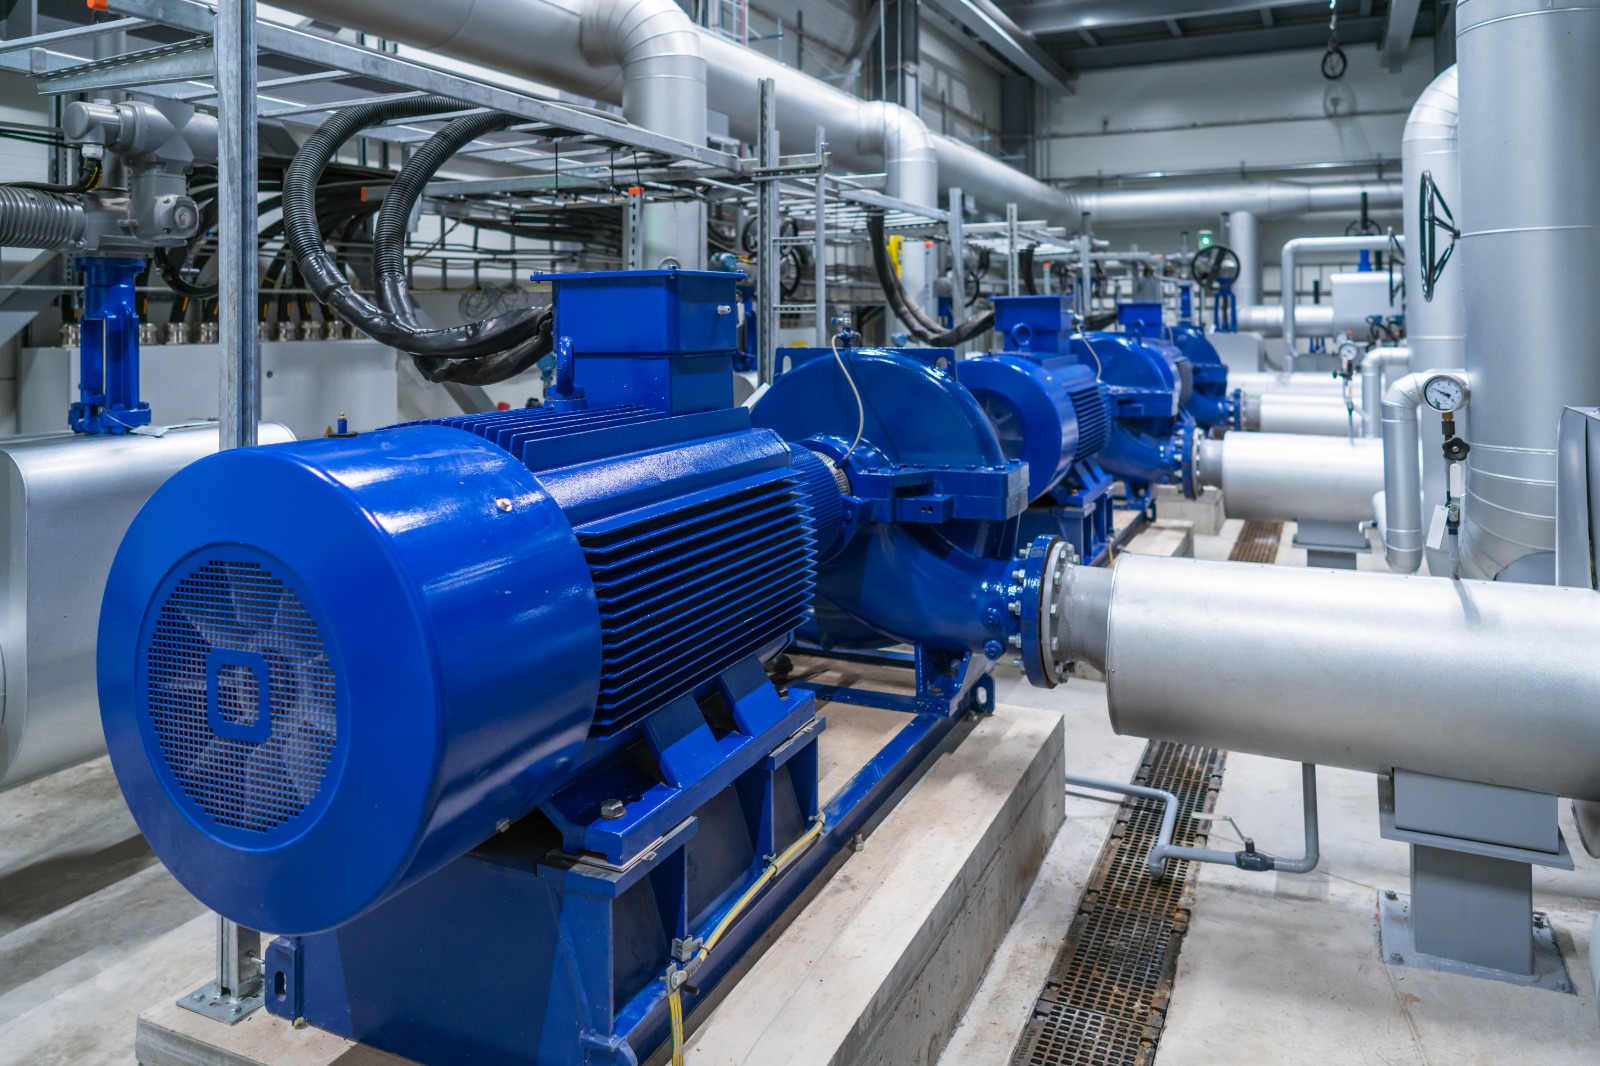 Even small efficiency increases in electric motors contribute significantly to operational efficiency.